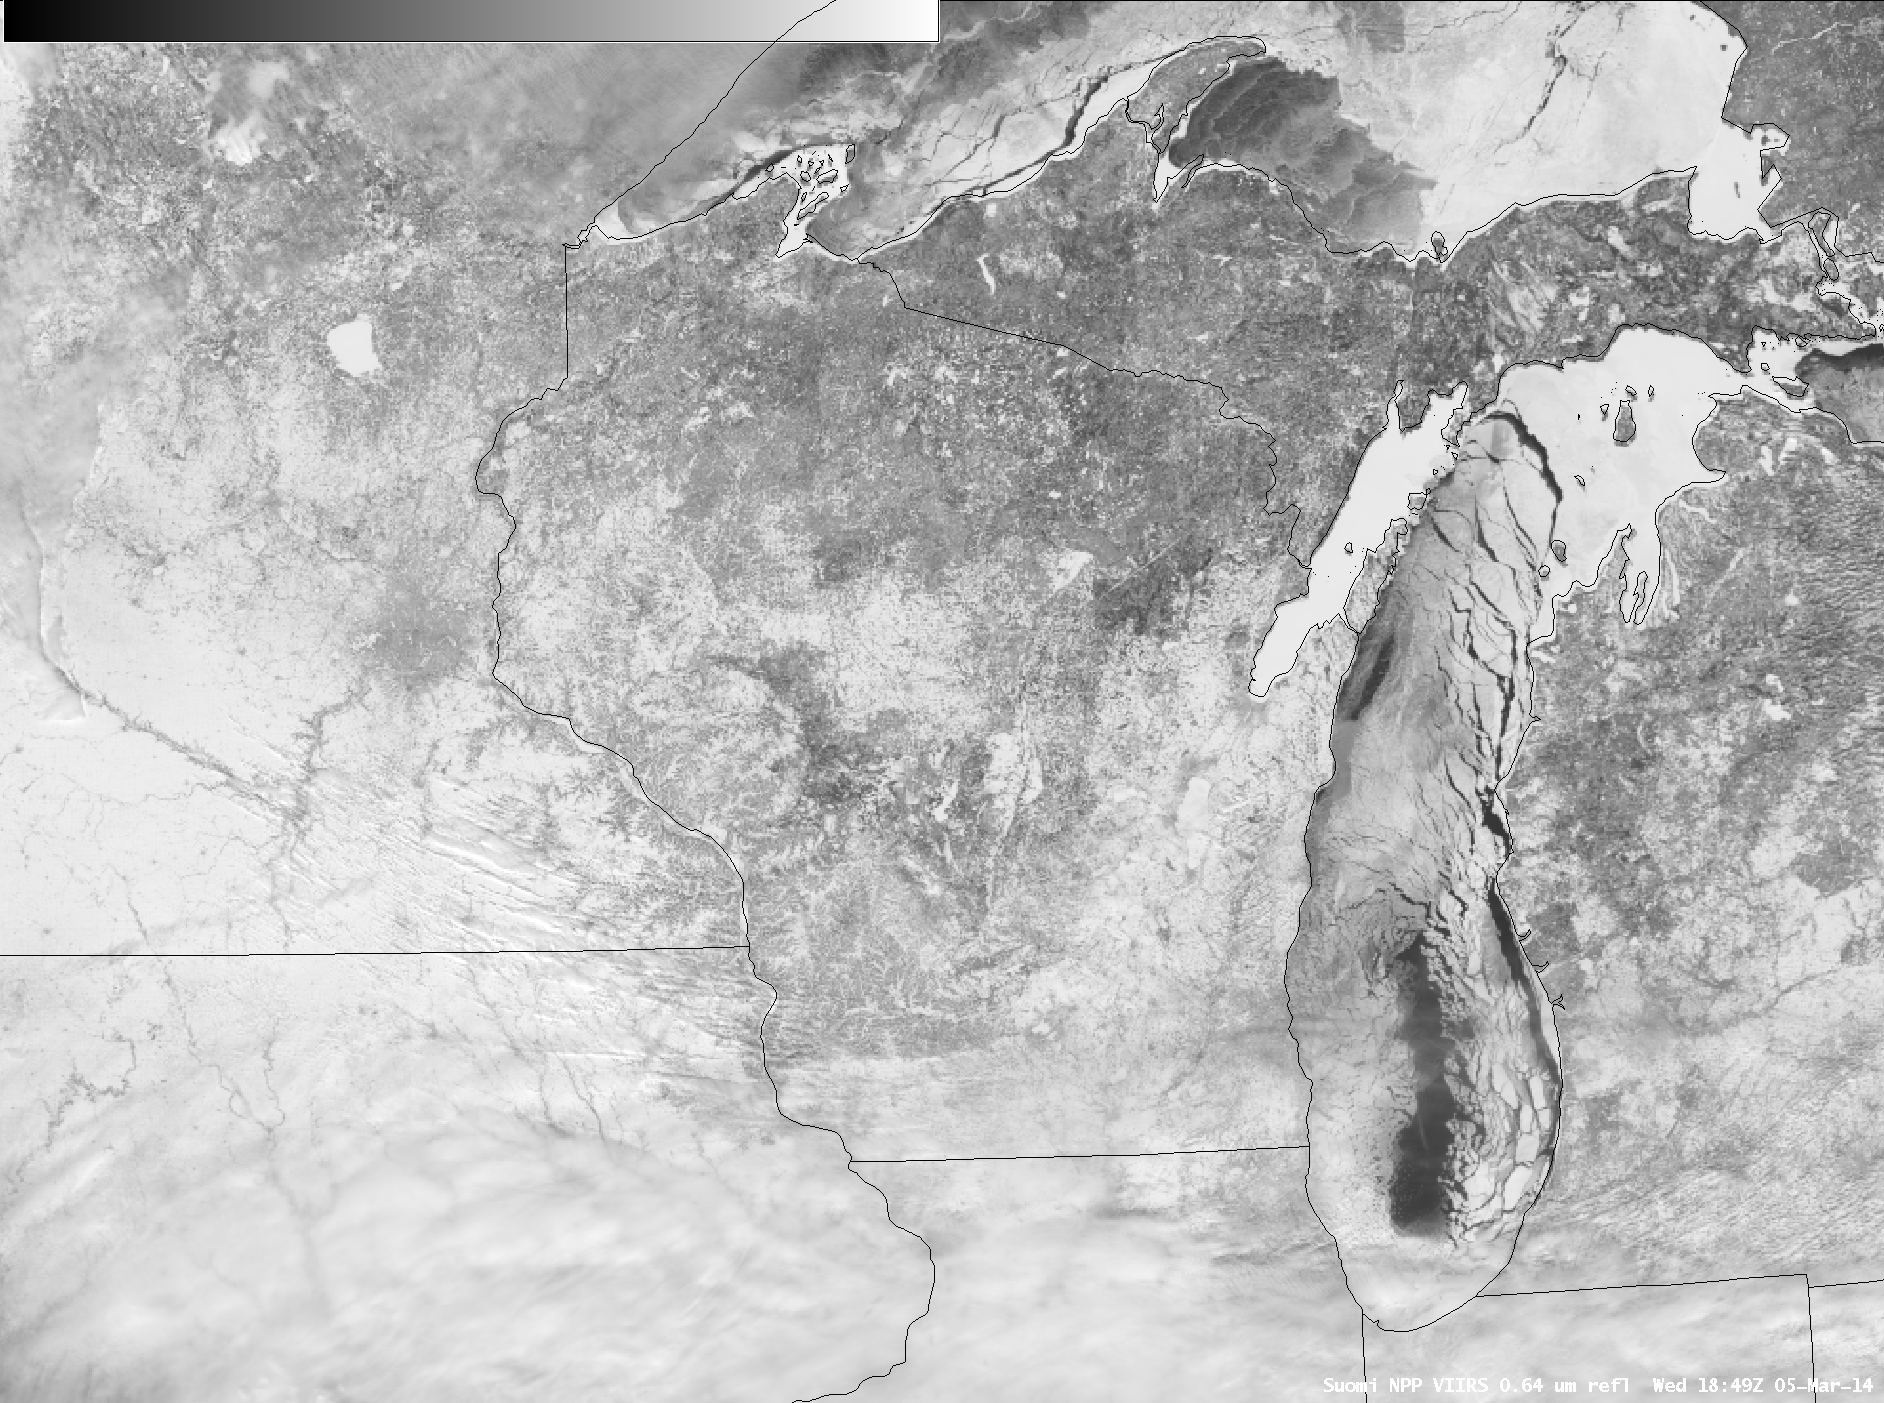 Suomi NPP VIIRS 0.64 Âµm visible channel and False-color RGB images